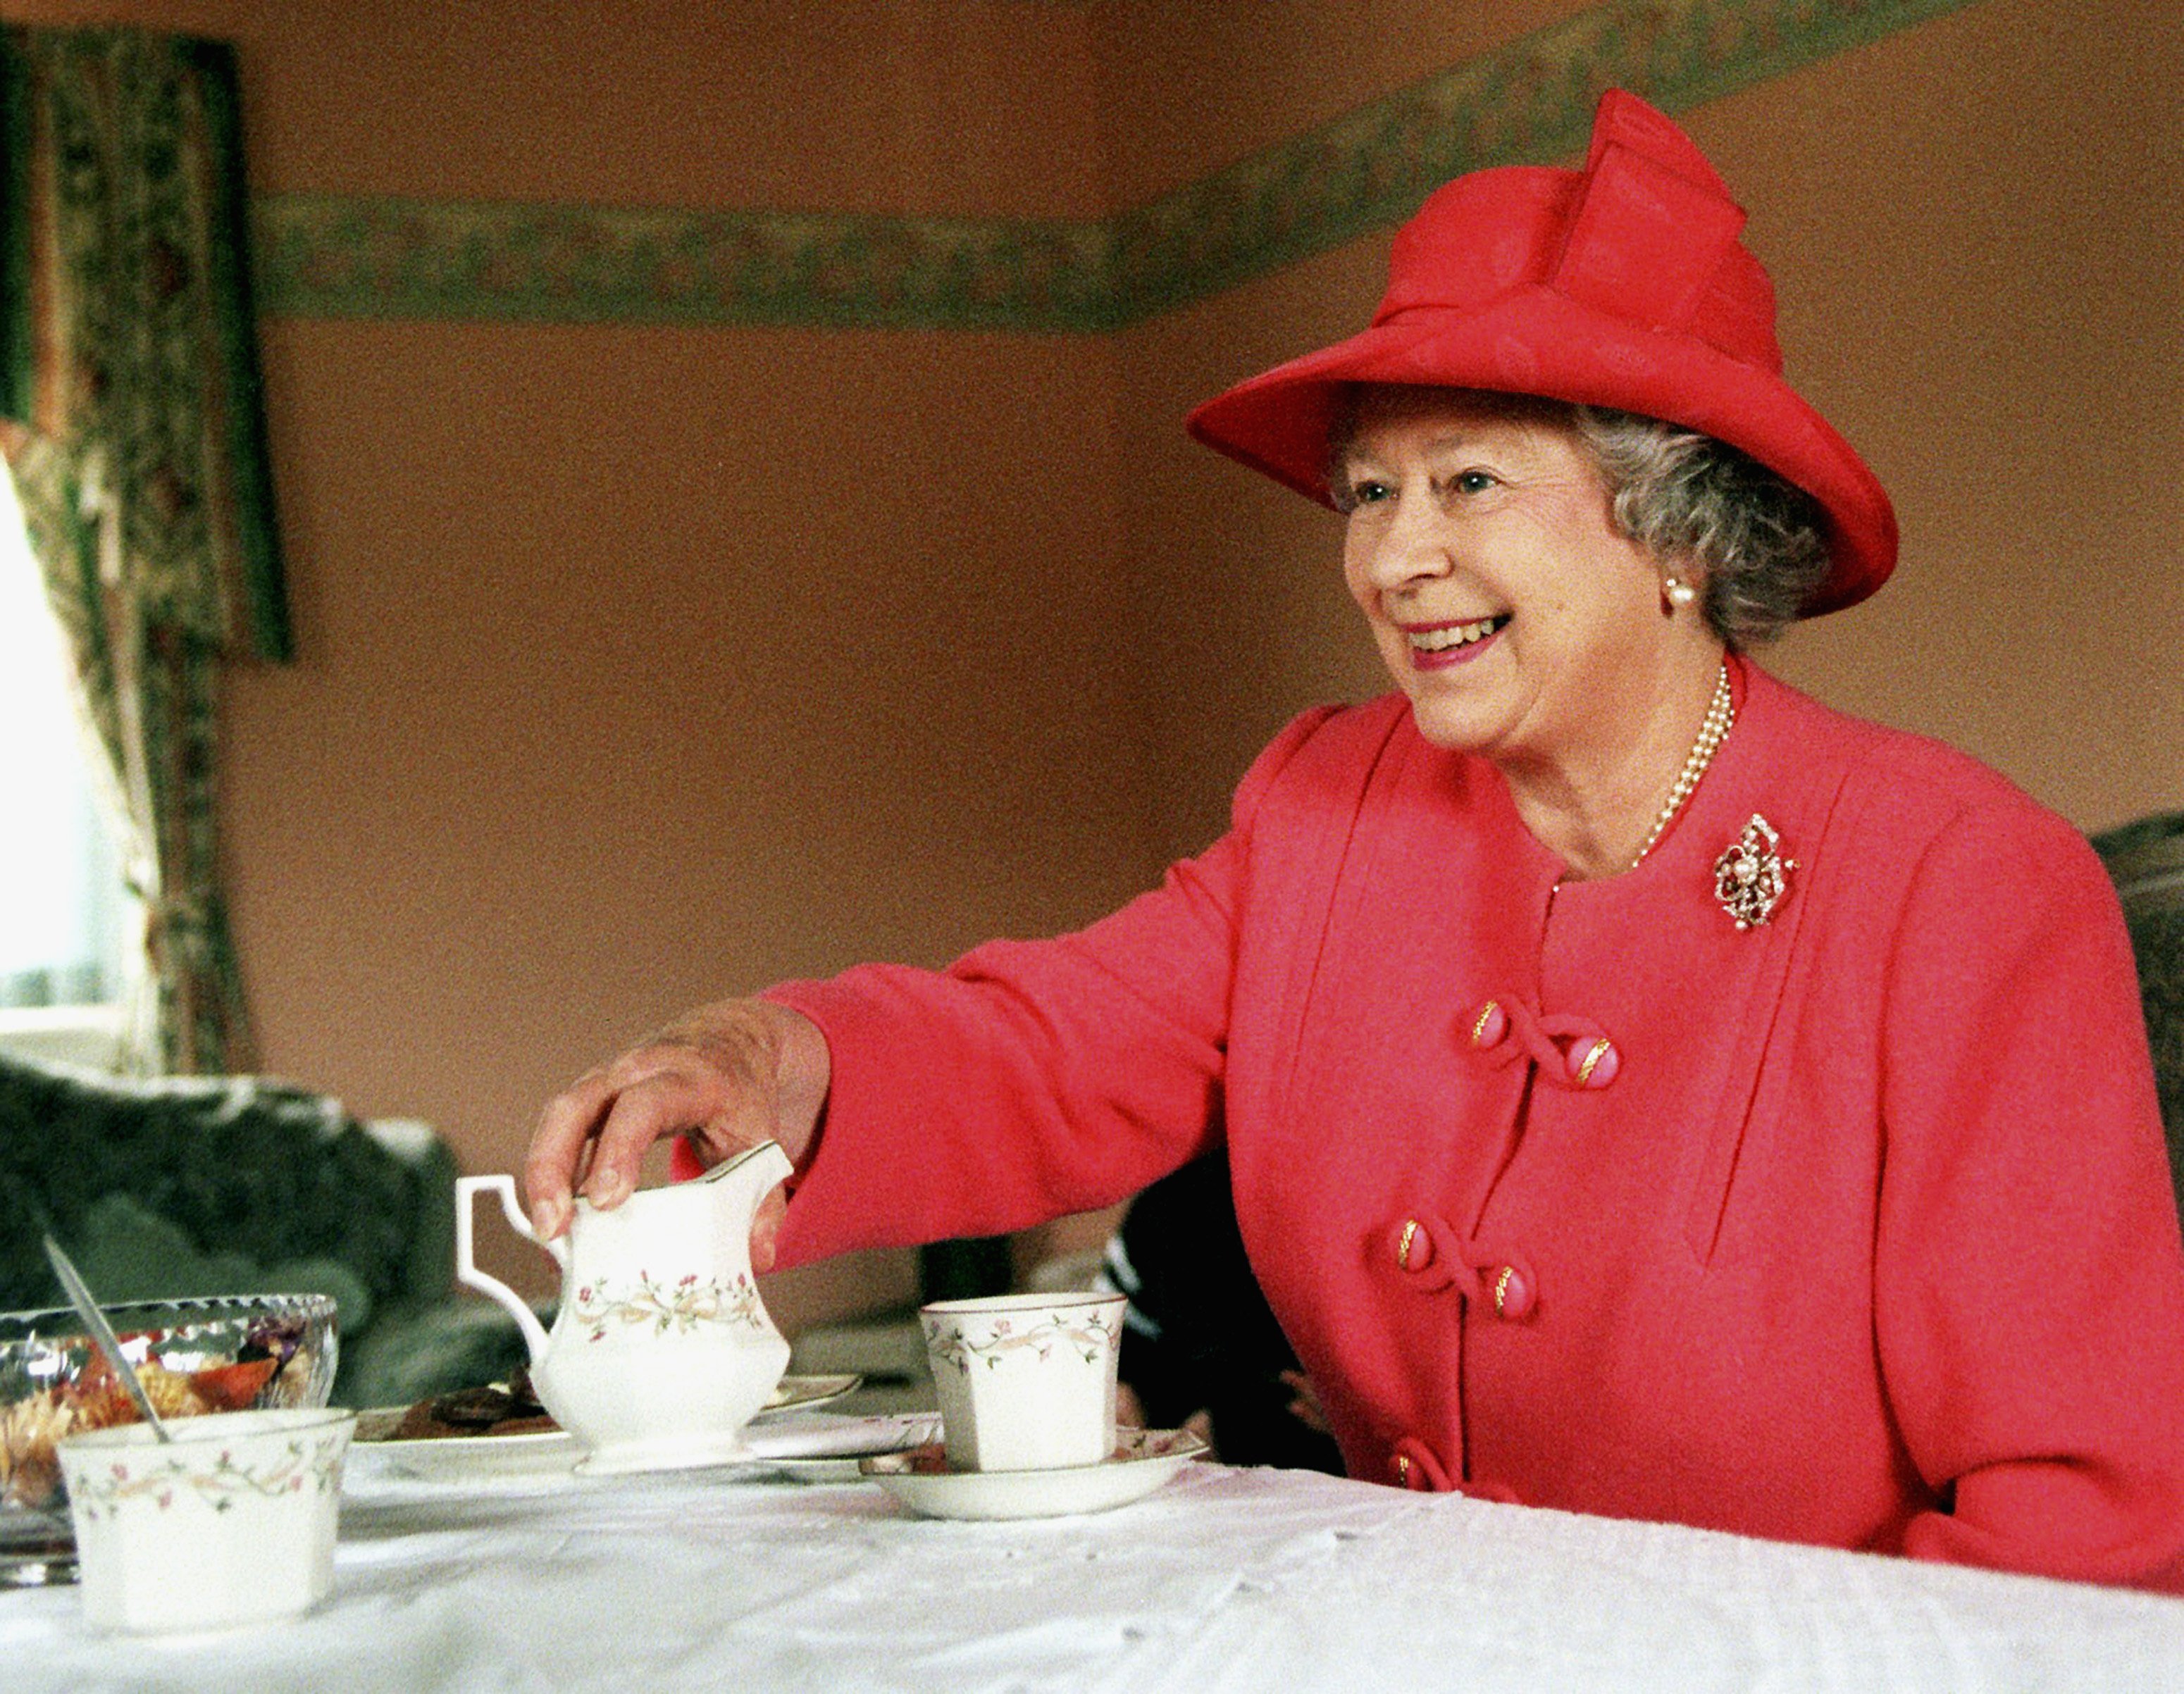 Queen Elizabeth II joins Mrs Susan McCarron, her ten-year-old son, James, and Housing Manager Liz McGinniss for tea in their home in the Castlemilk area of Glasgow in Scotland on July 7, 1999. | Source: Getty Images